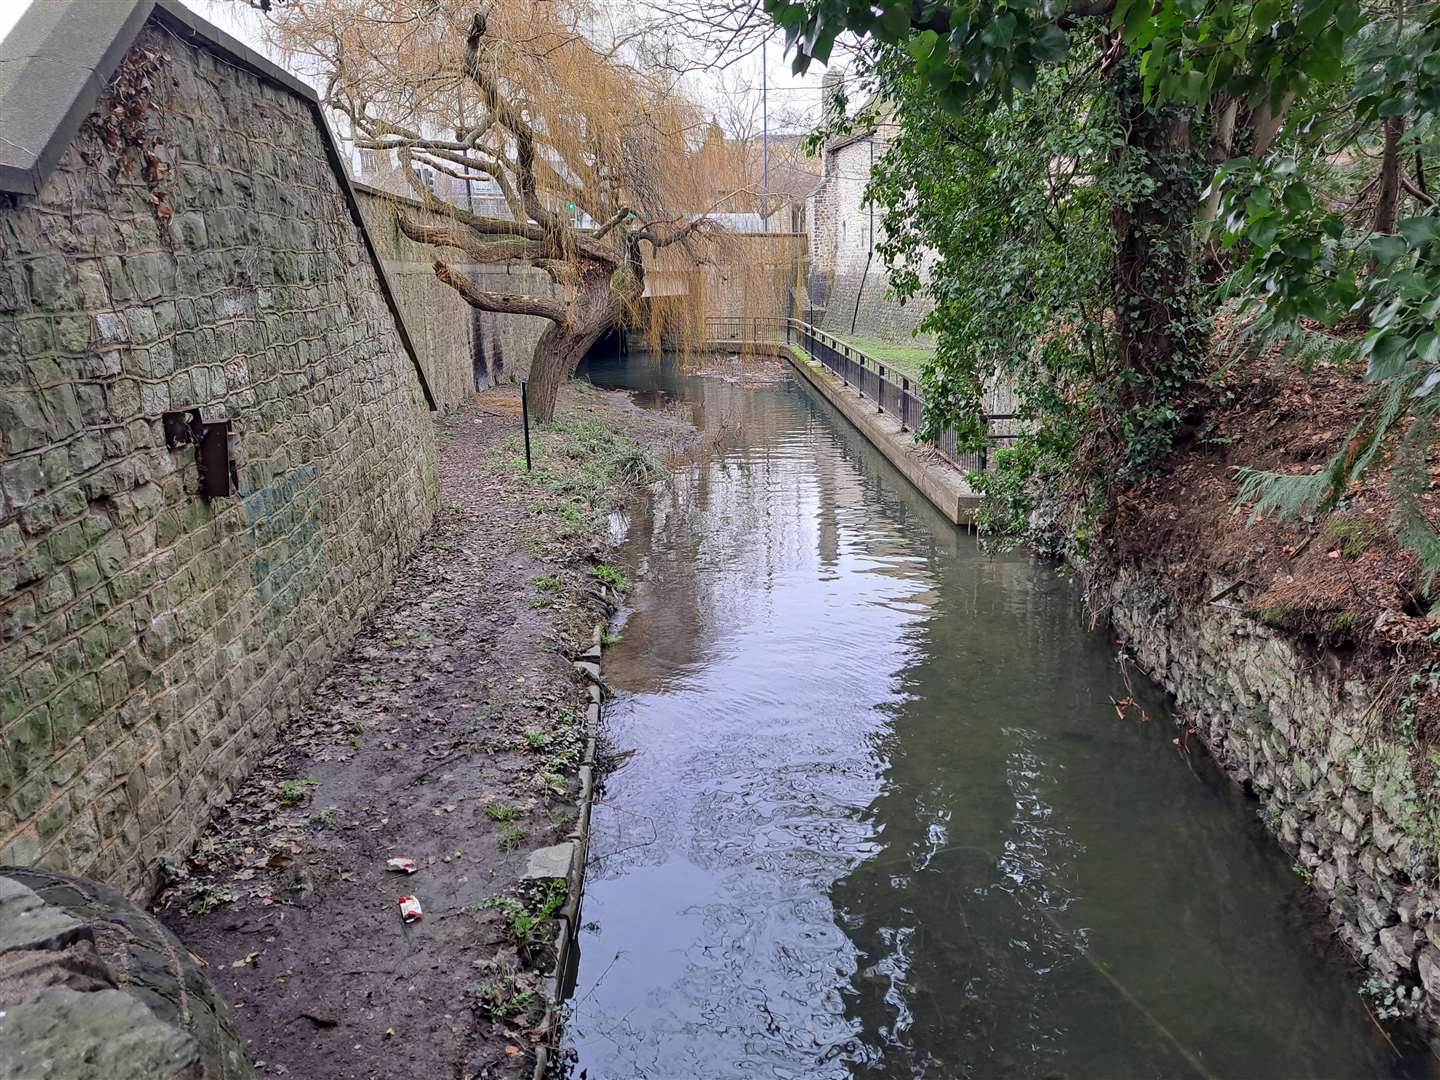 The River Len near its confluence with the River Medway in Maidstone